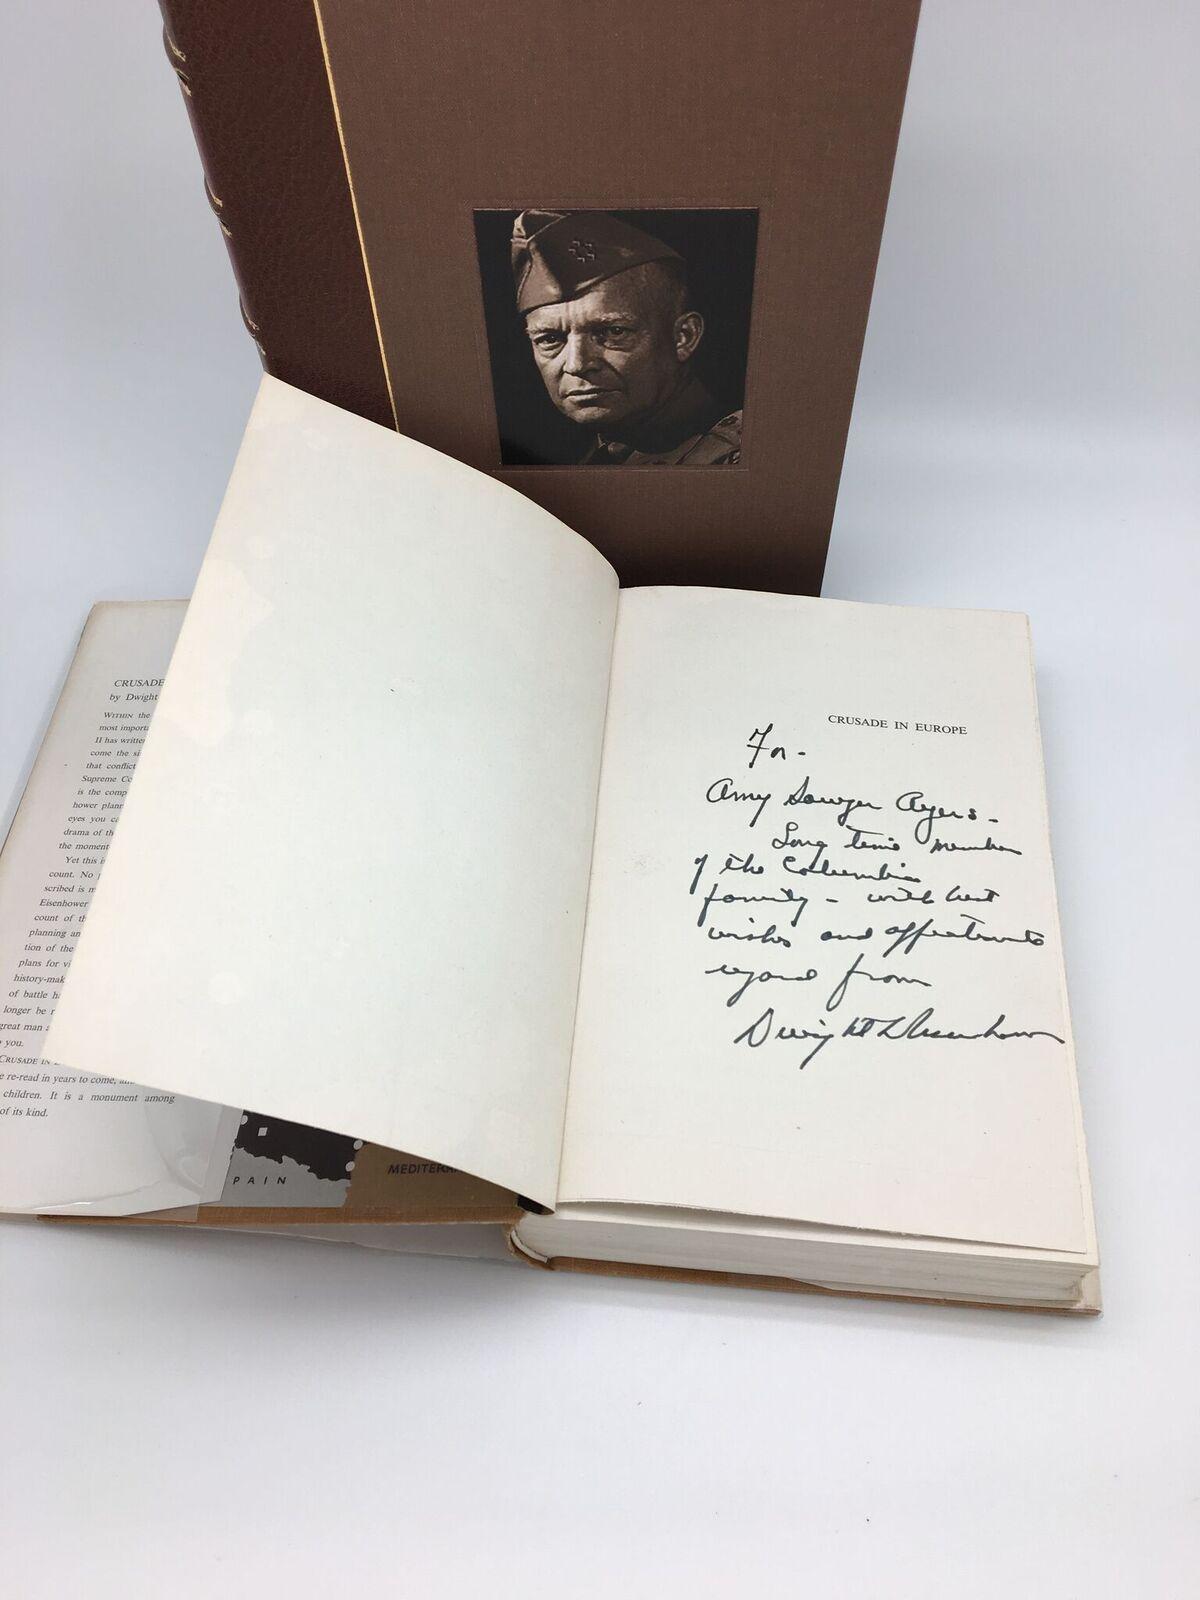 Eisenhower, Dwight D. Crusade in Europe. New York: Doubleday, 1948. State first trade edition, in original dust jacket. Signed and inscribed by General Eisenhower. Presented in custom quarter leather and cloth clamshell.

This is the stated first